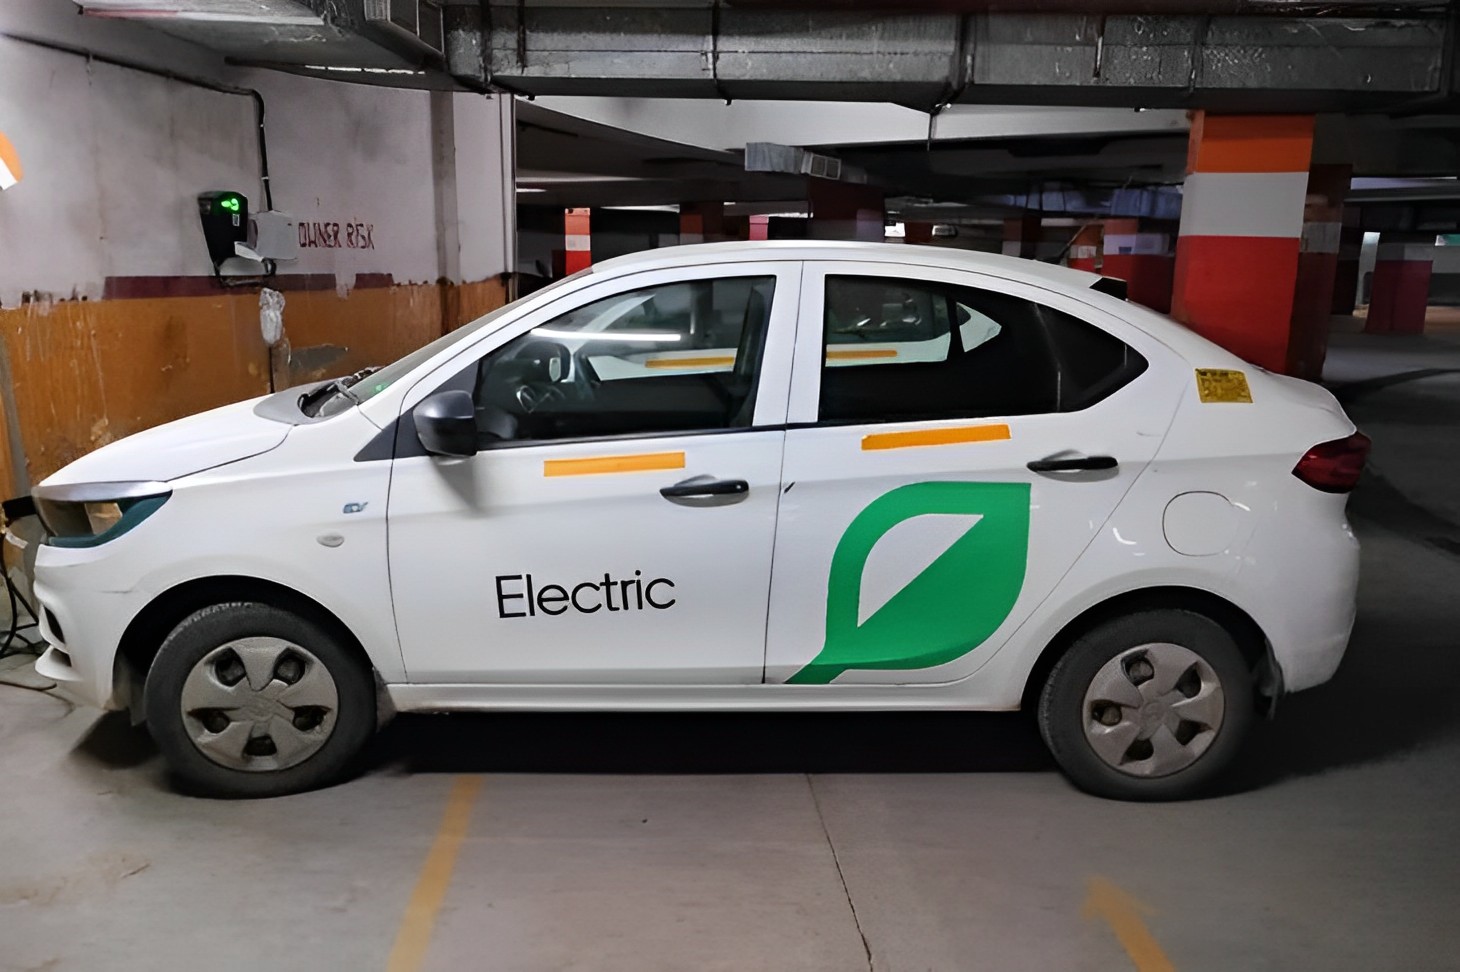 https://e-vehicleinfo.com/ola-launches-electric-cab-service-in-india/